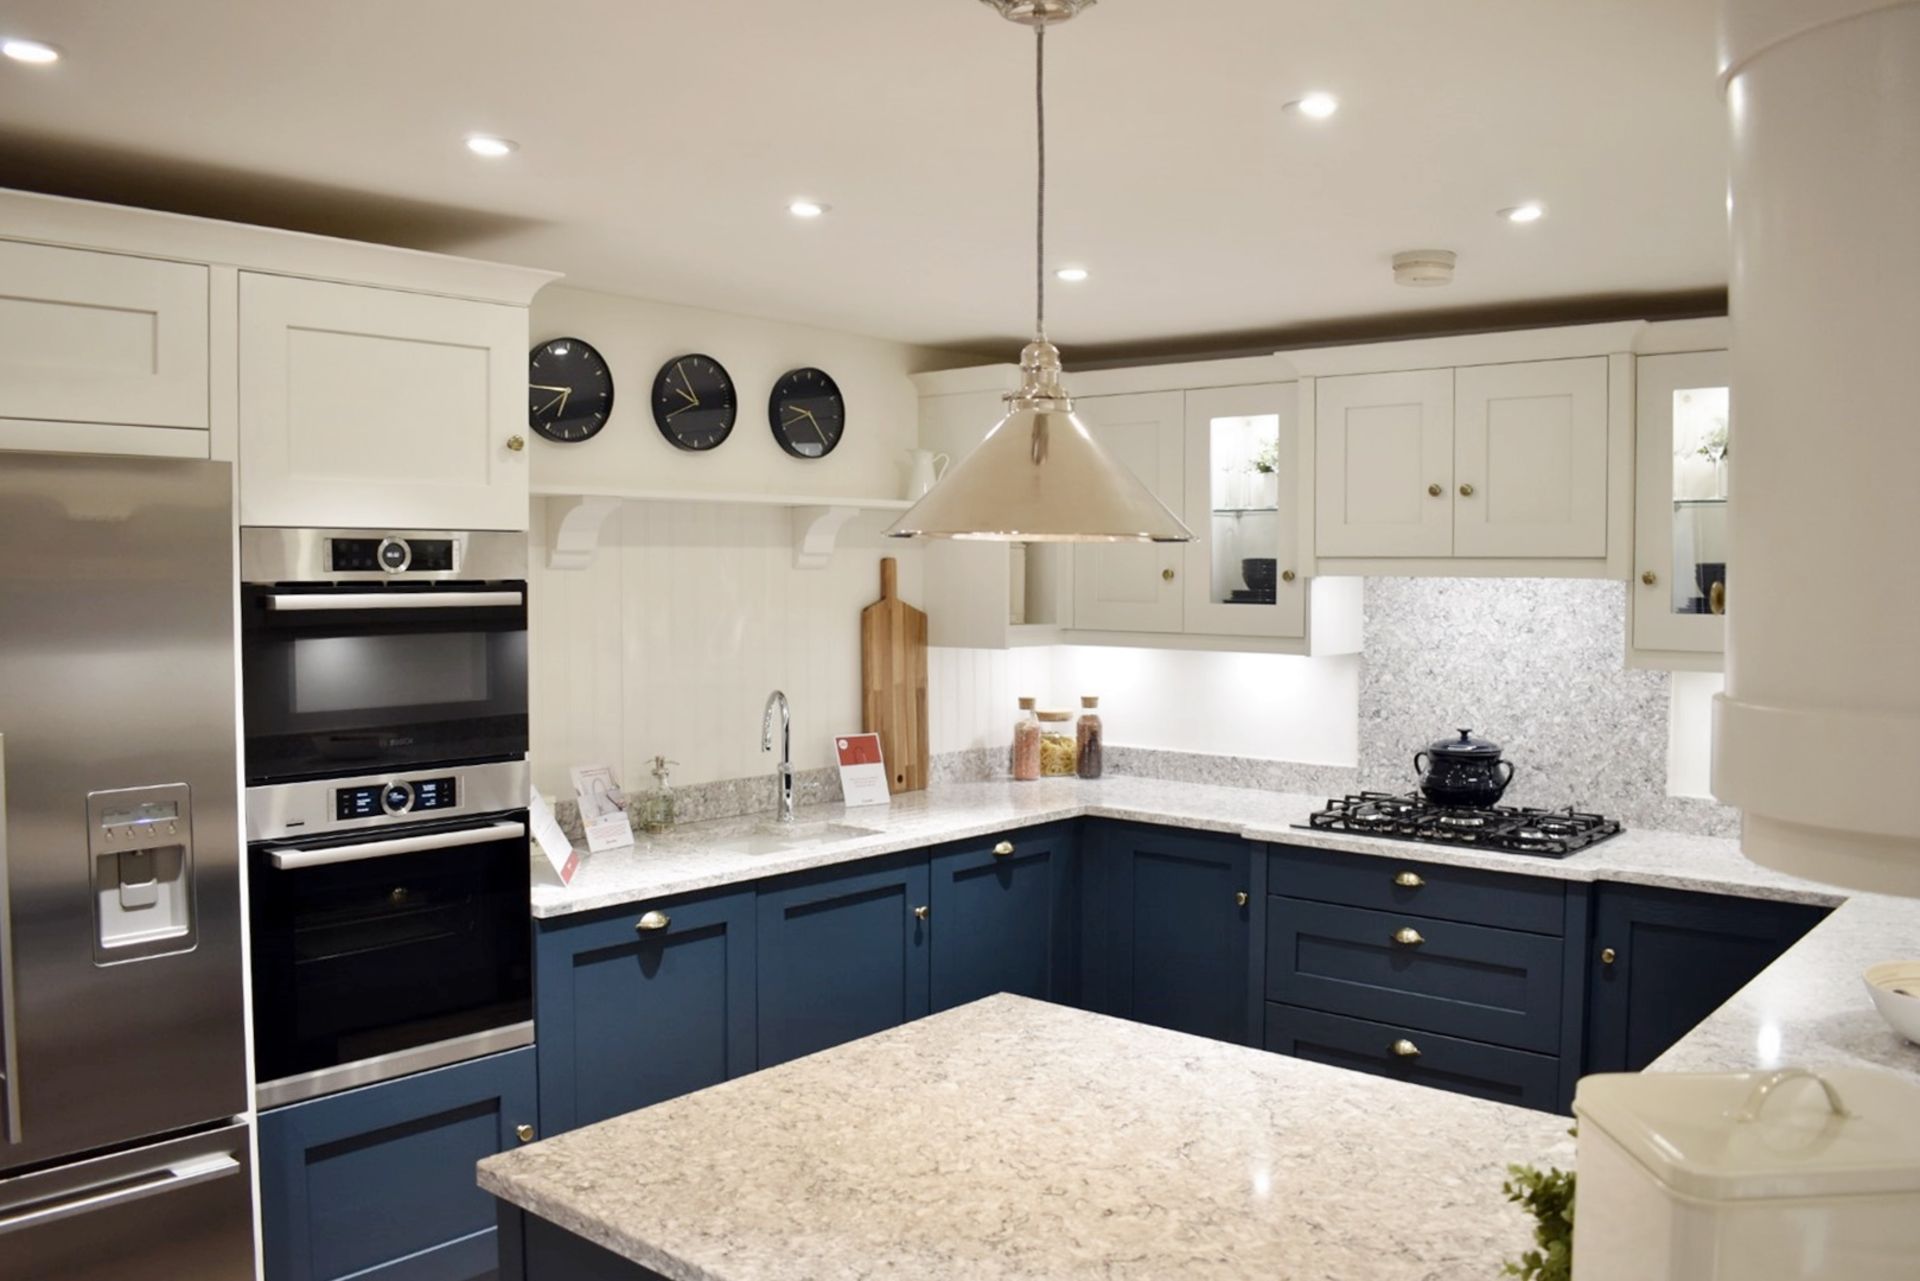 1 x 'Mornington' Shaker-style Feature-rich Fitted Kitchen in Blue, with Premium Branded Appliances - Bild 2 aus 67